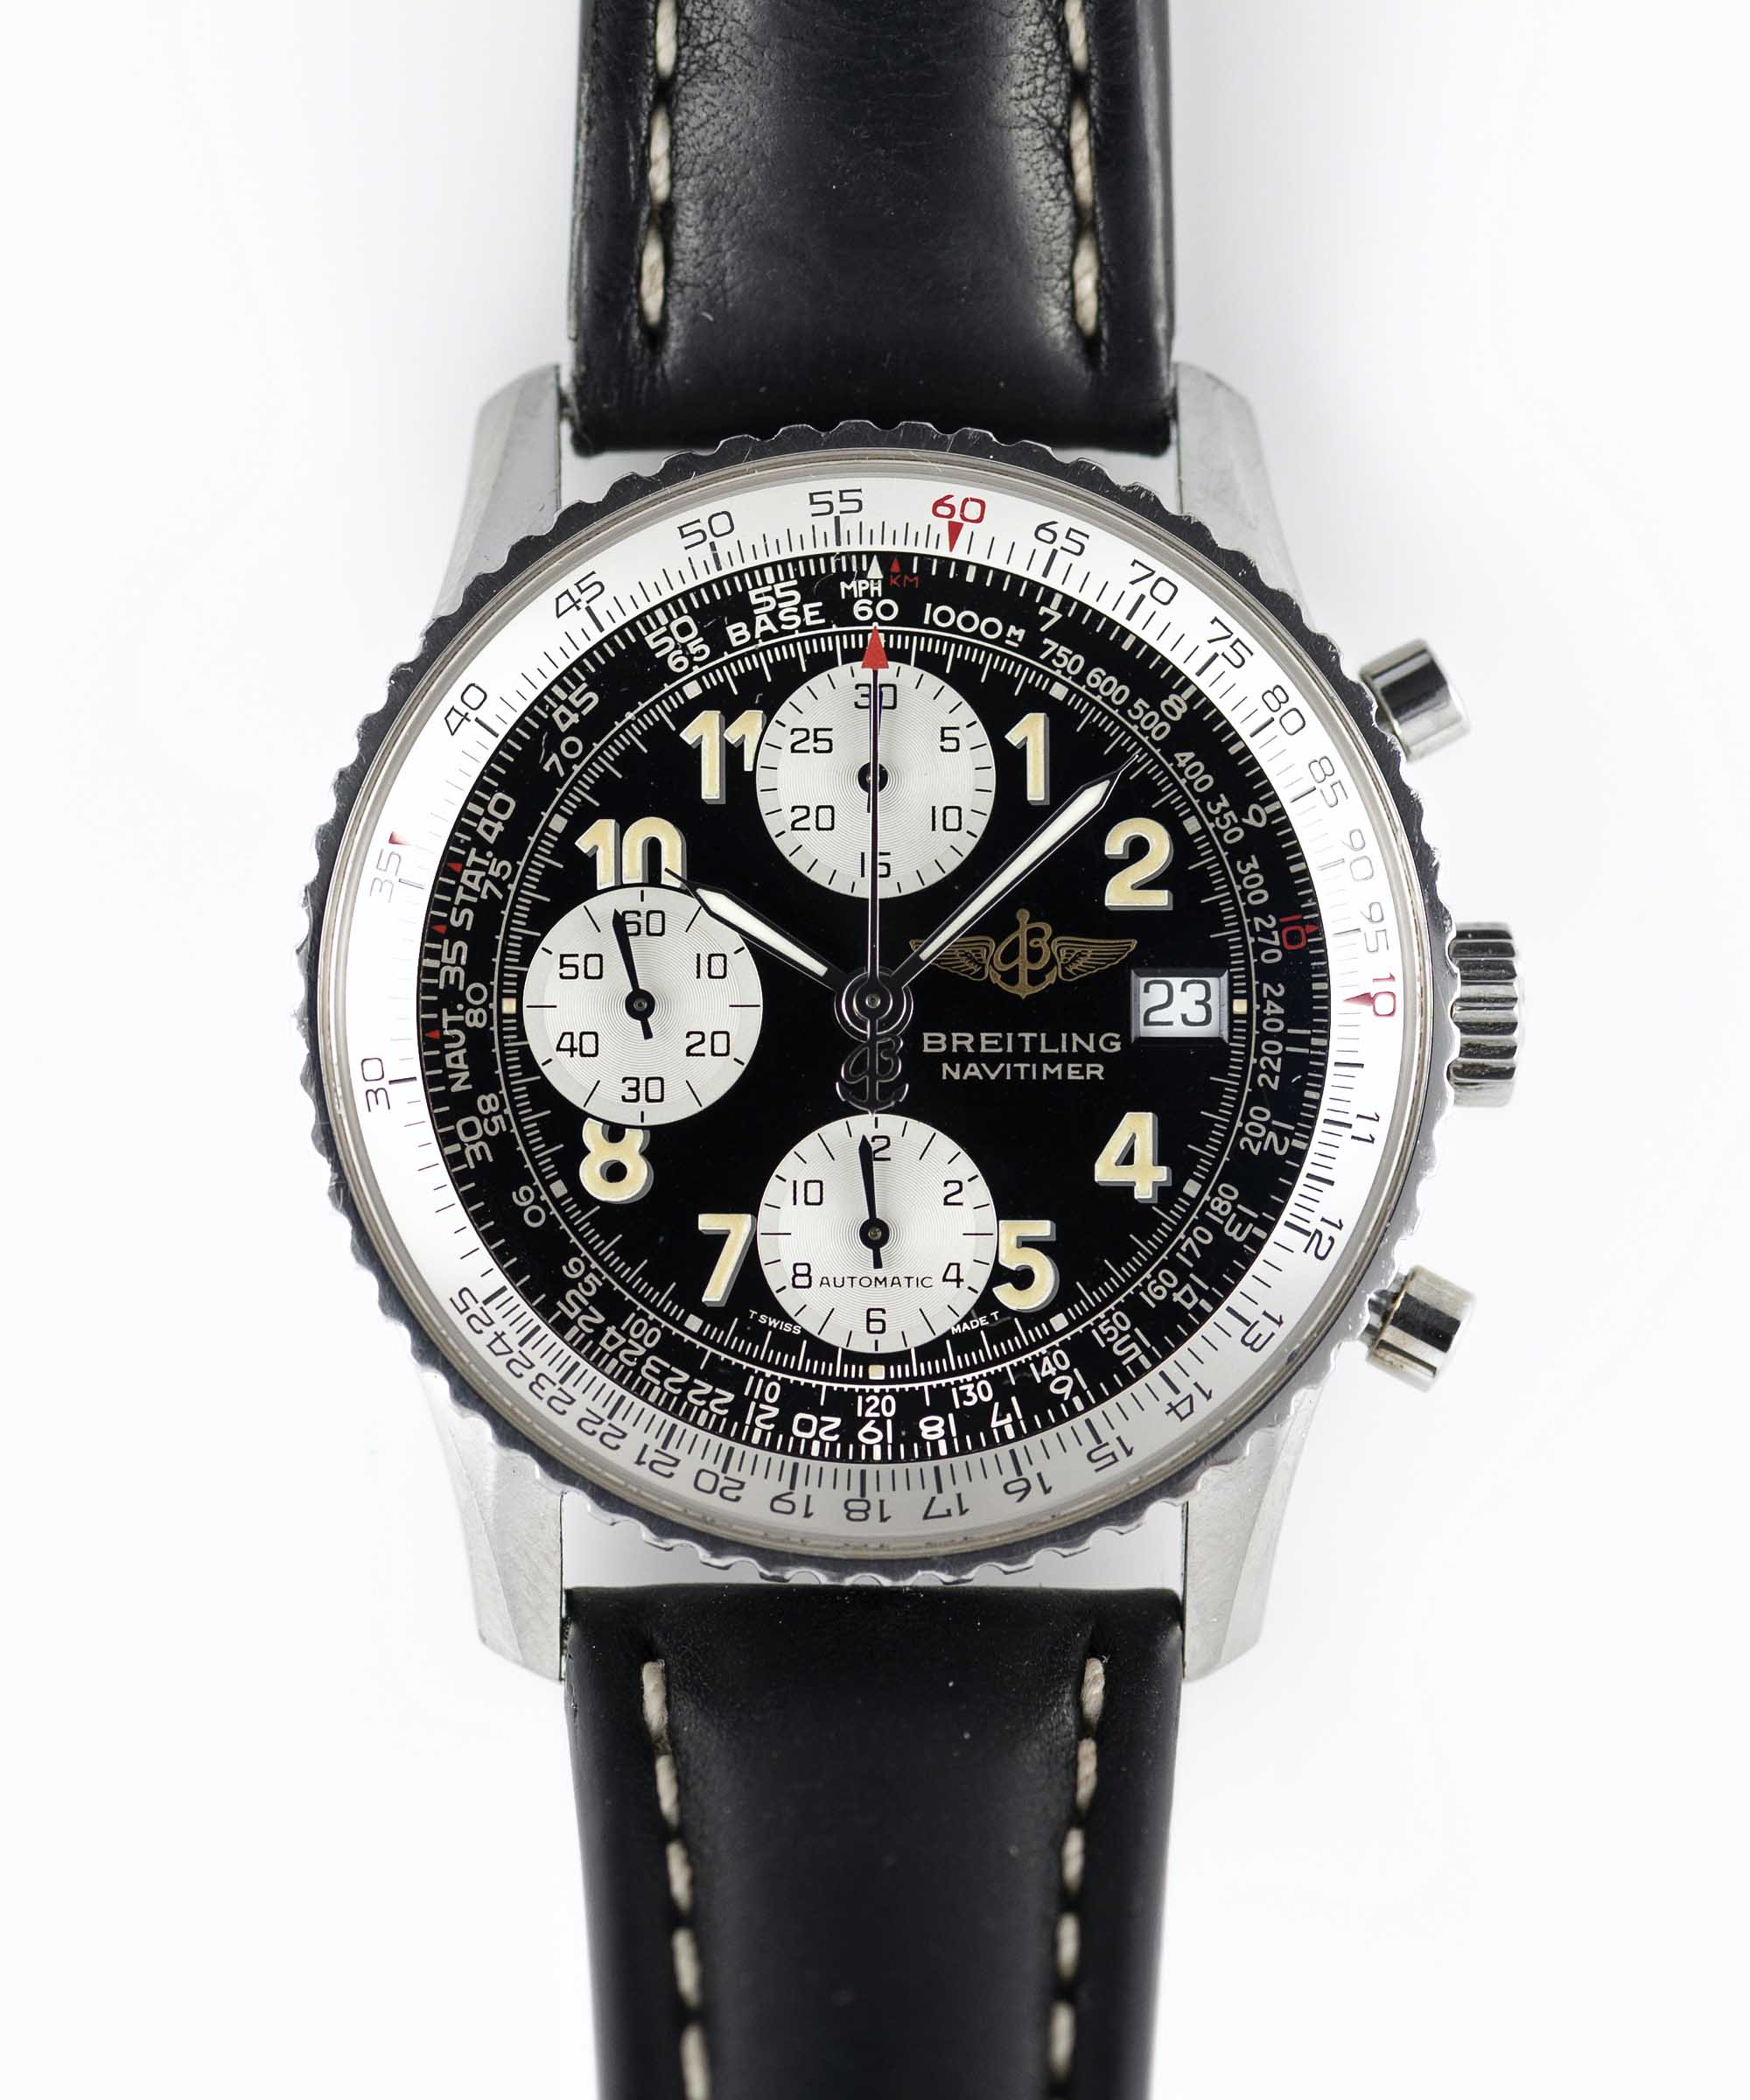 A GENTLEMAN'S STAINLESS STEEL BREITLING NAVITIMER AUTOMATIC CHRONOGRAPH WRIST WATCH CIRCA 1990s,